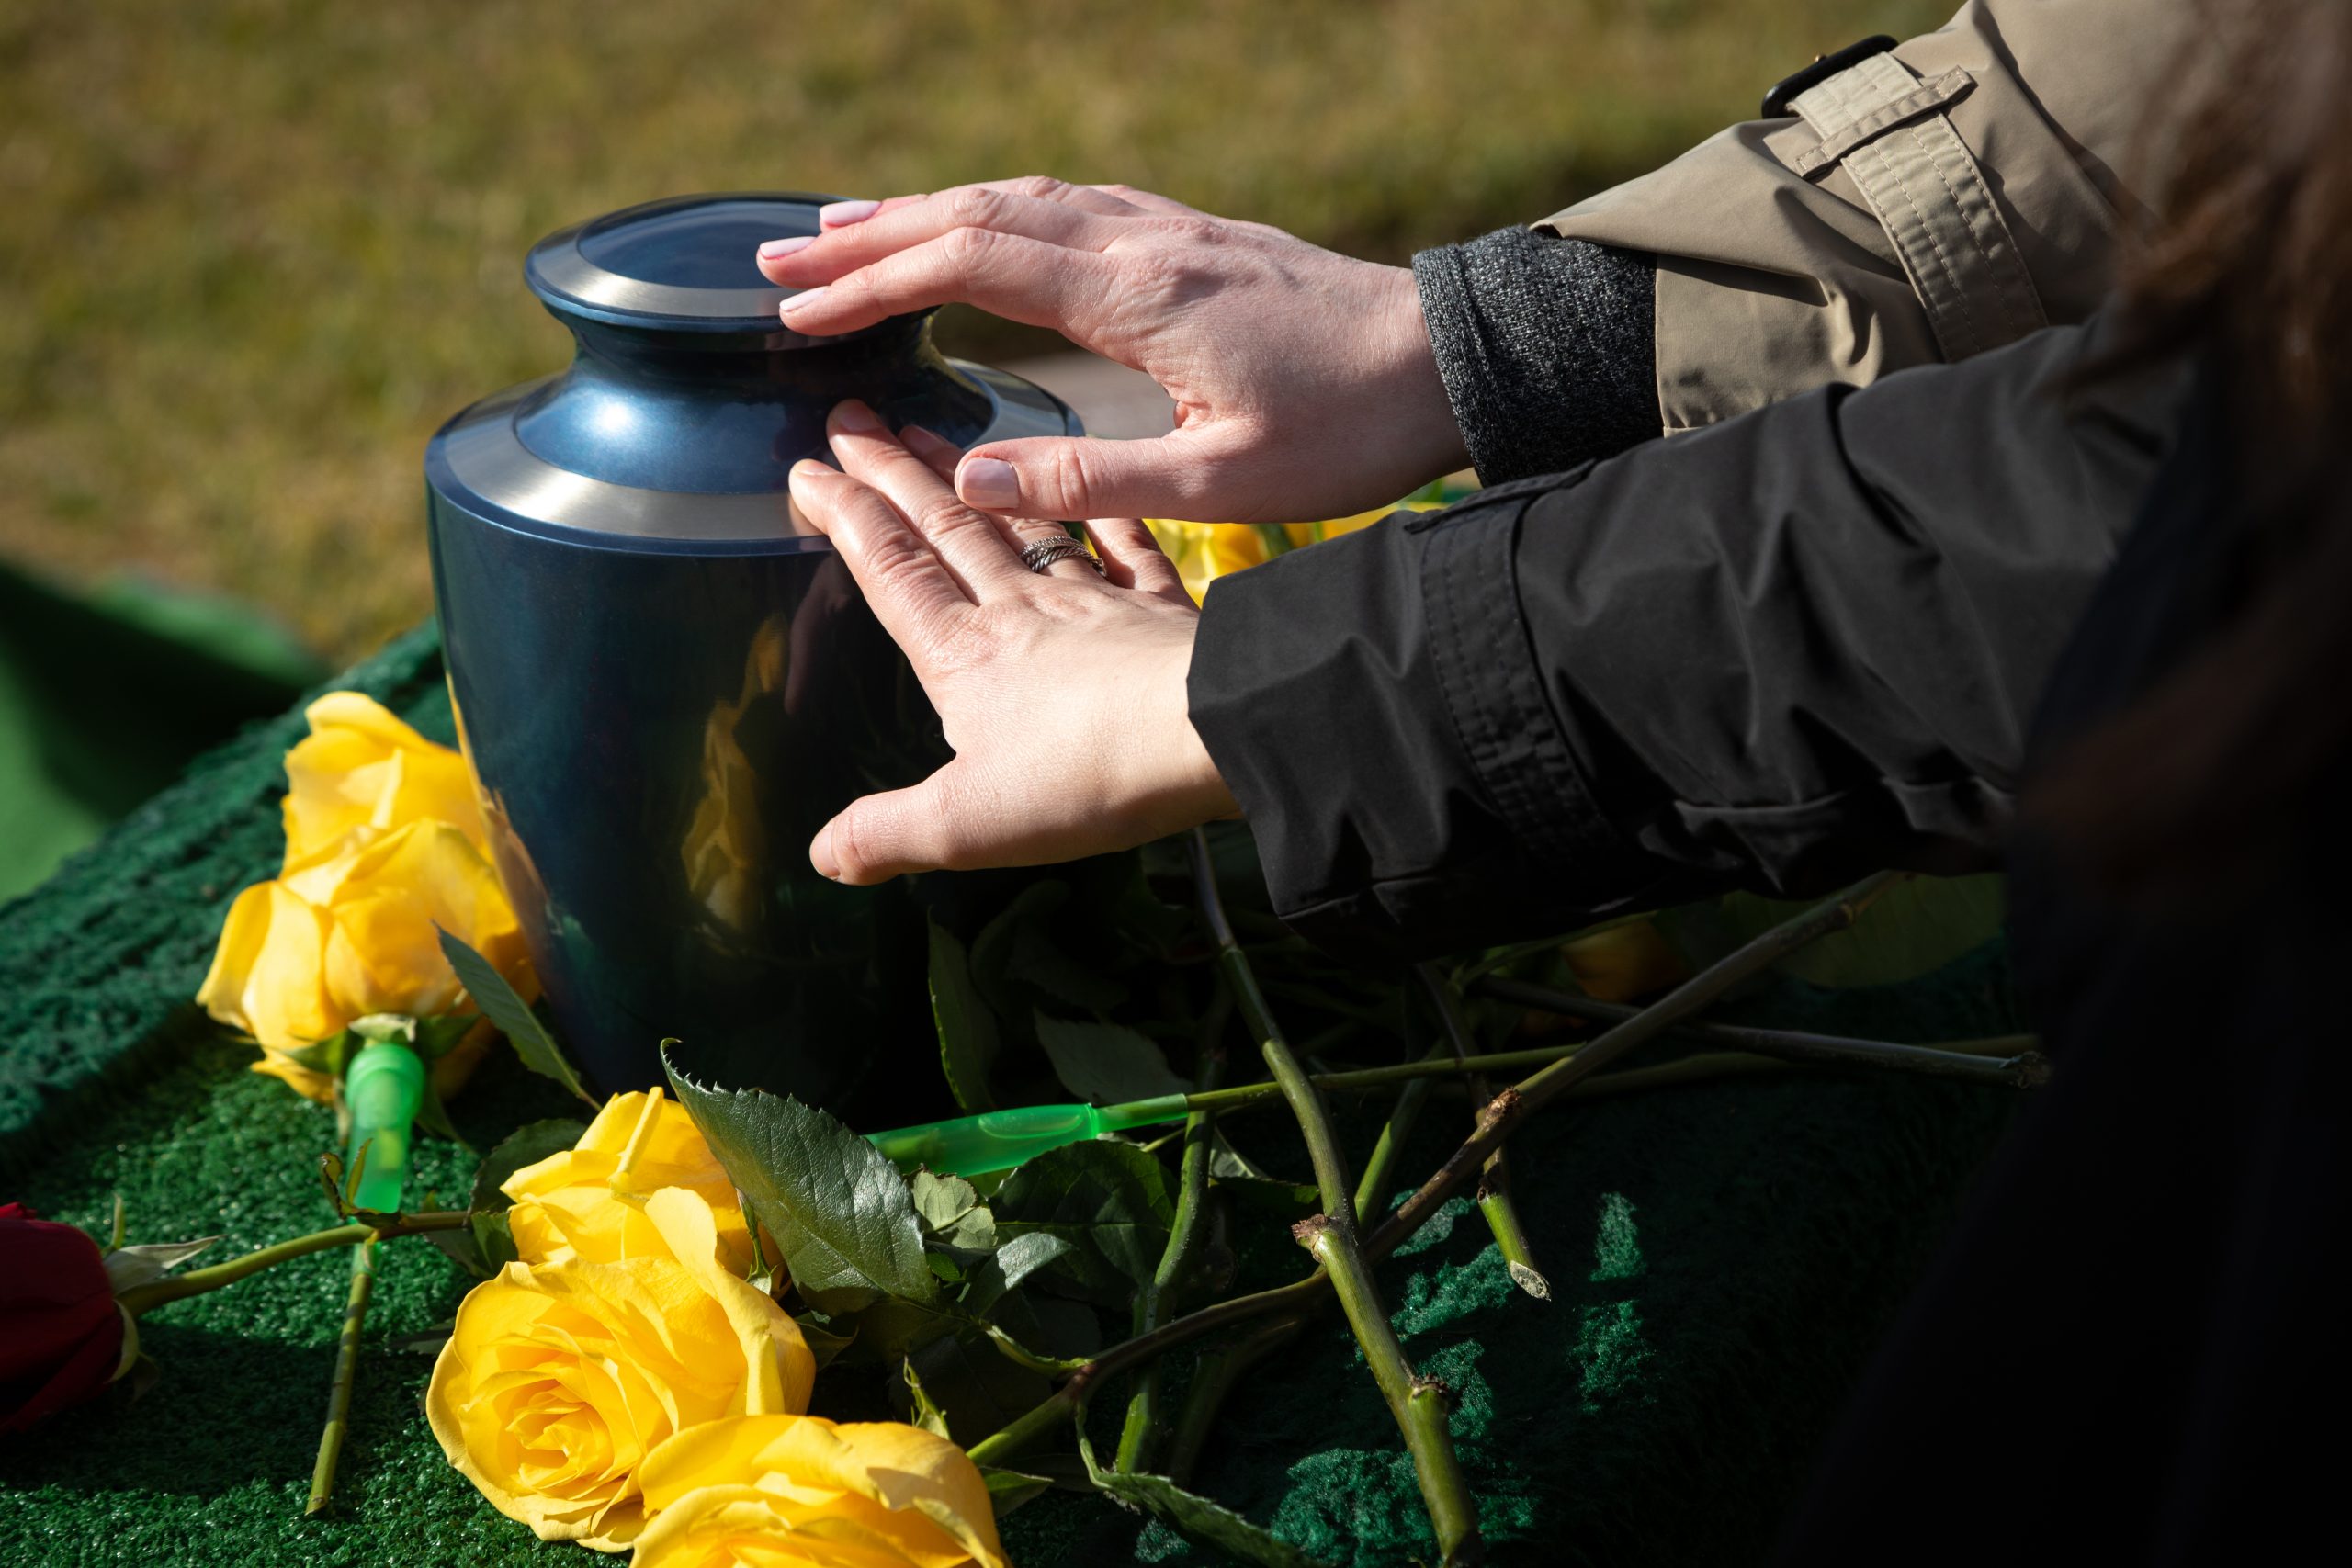 Can I Witness the Direct Cremation of a Family Member? 